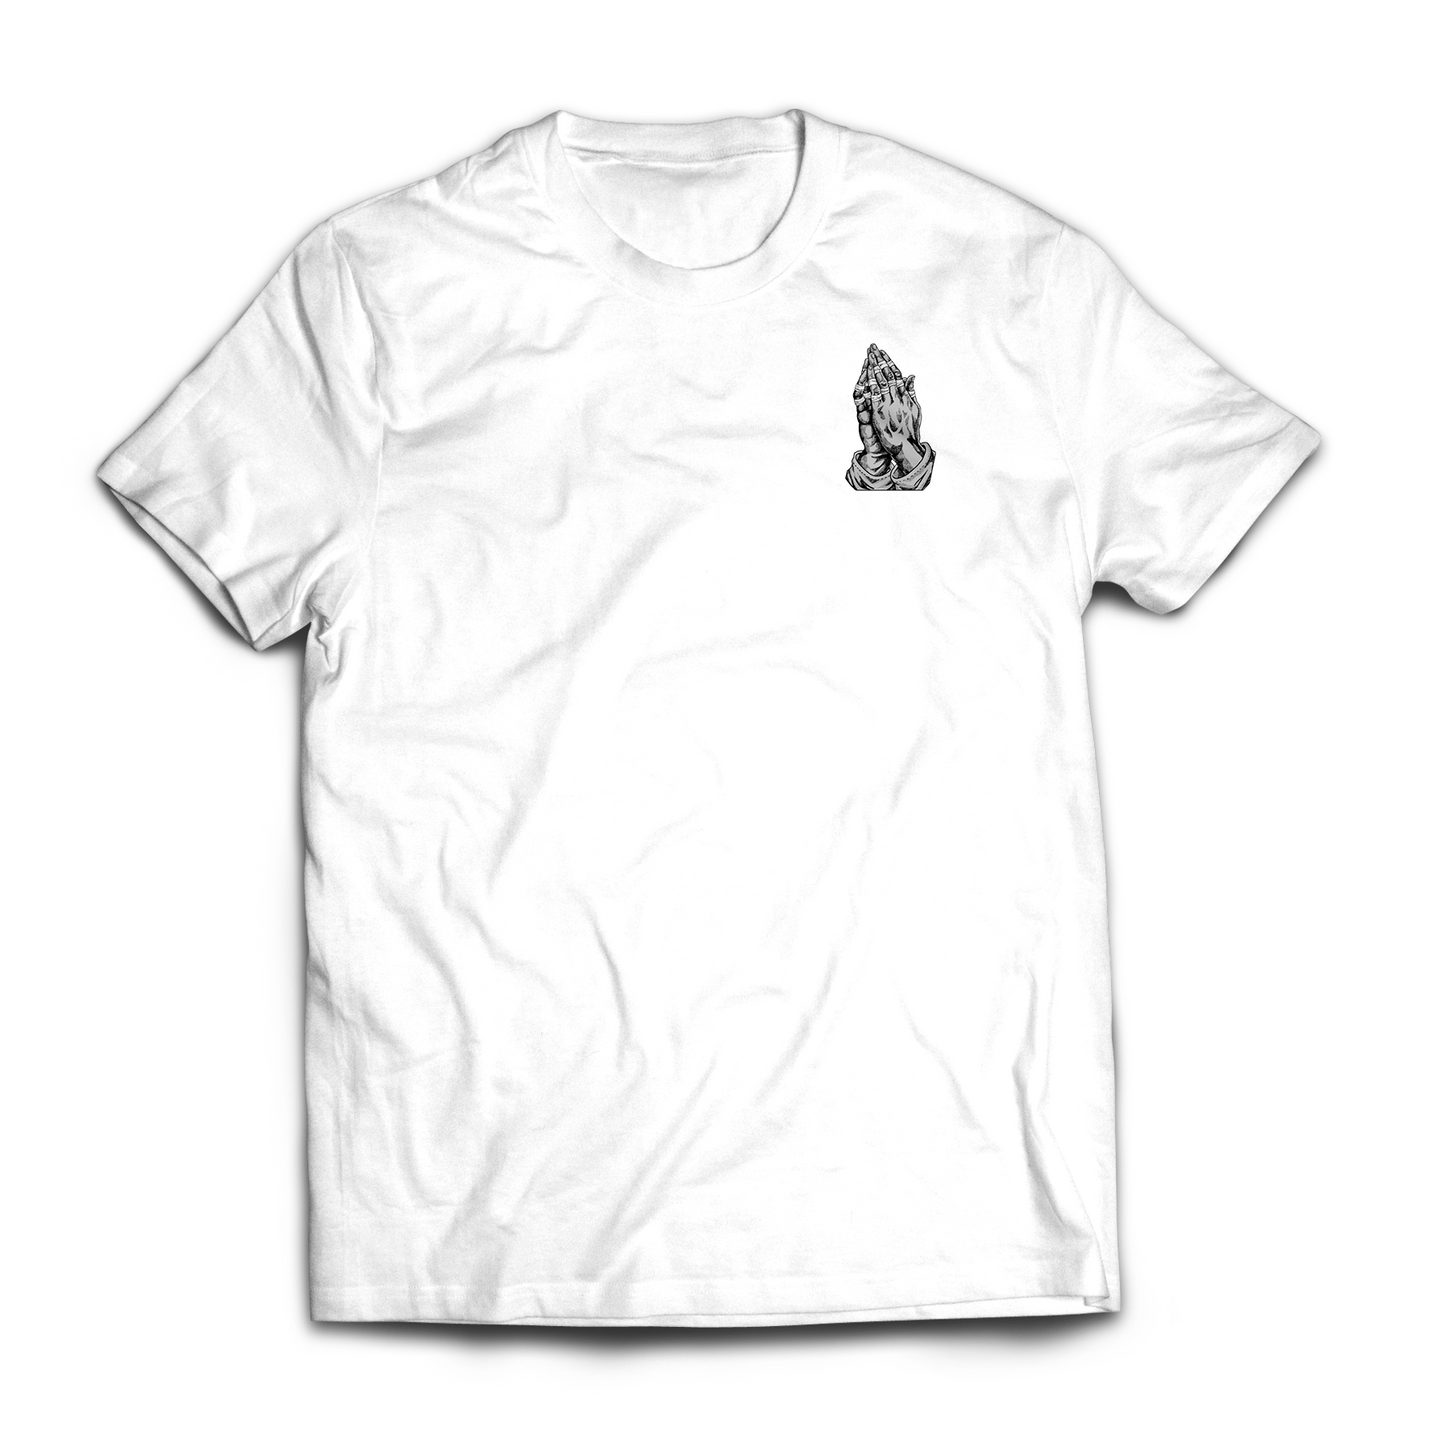 White Club – Hands T-Shirt Taped Tested - Combat